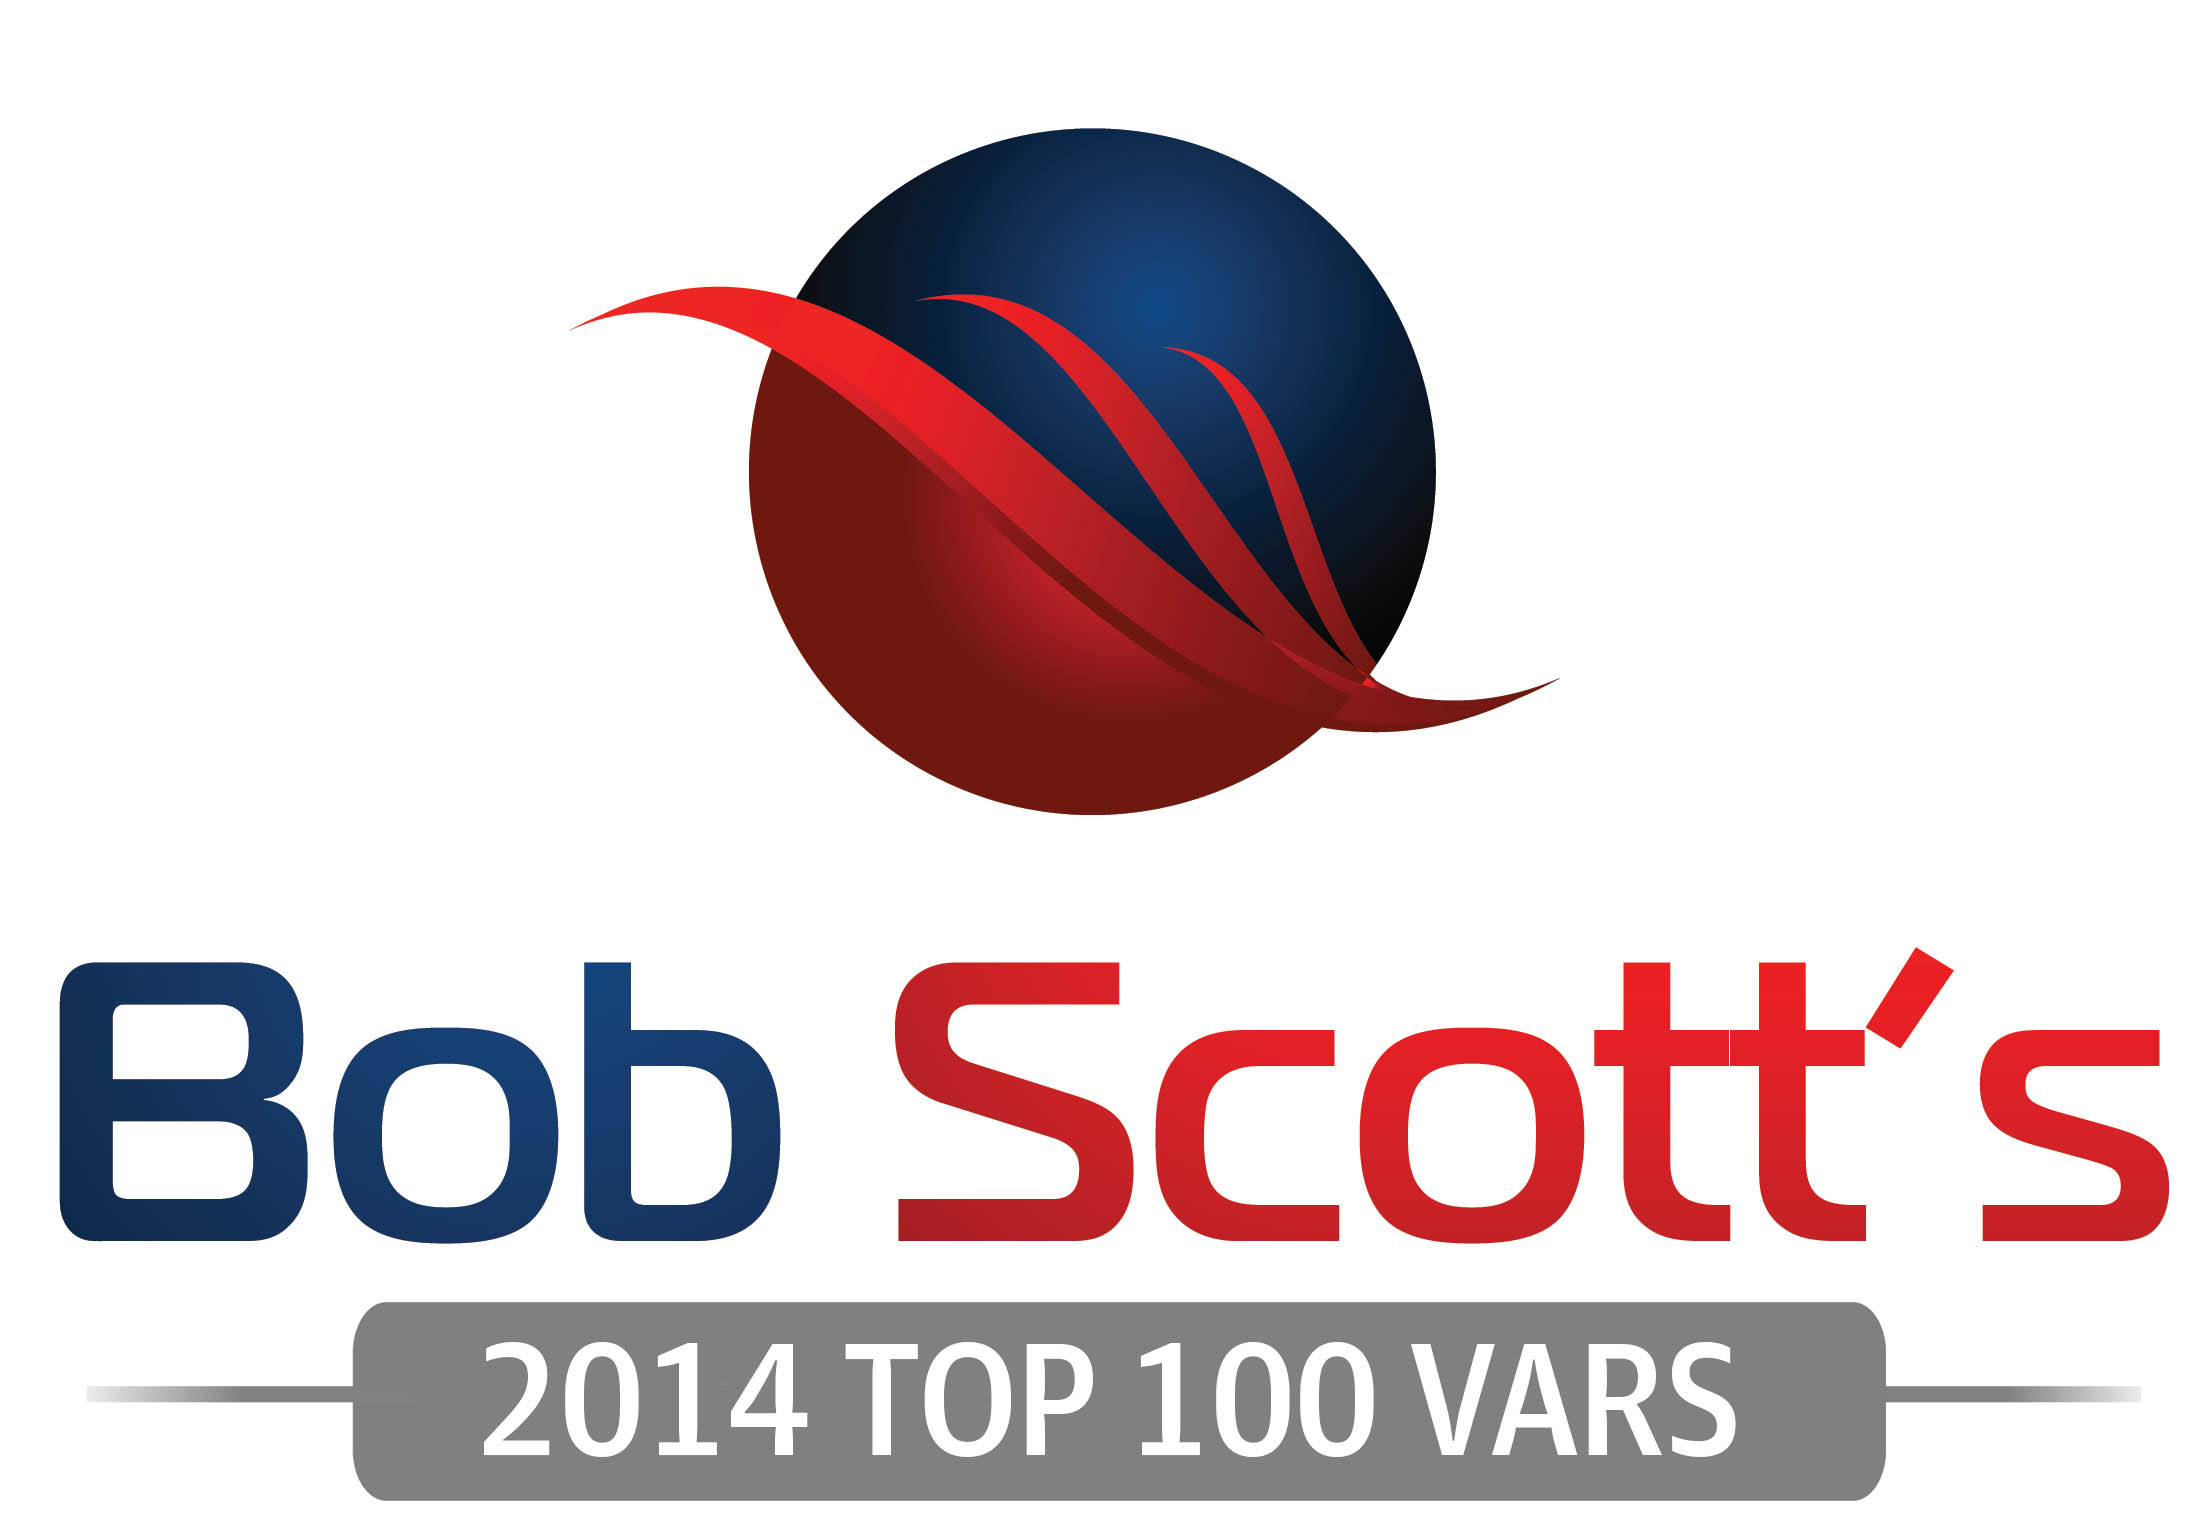 Top 100 VARs for 2014